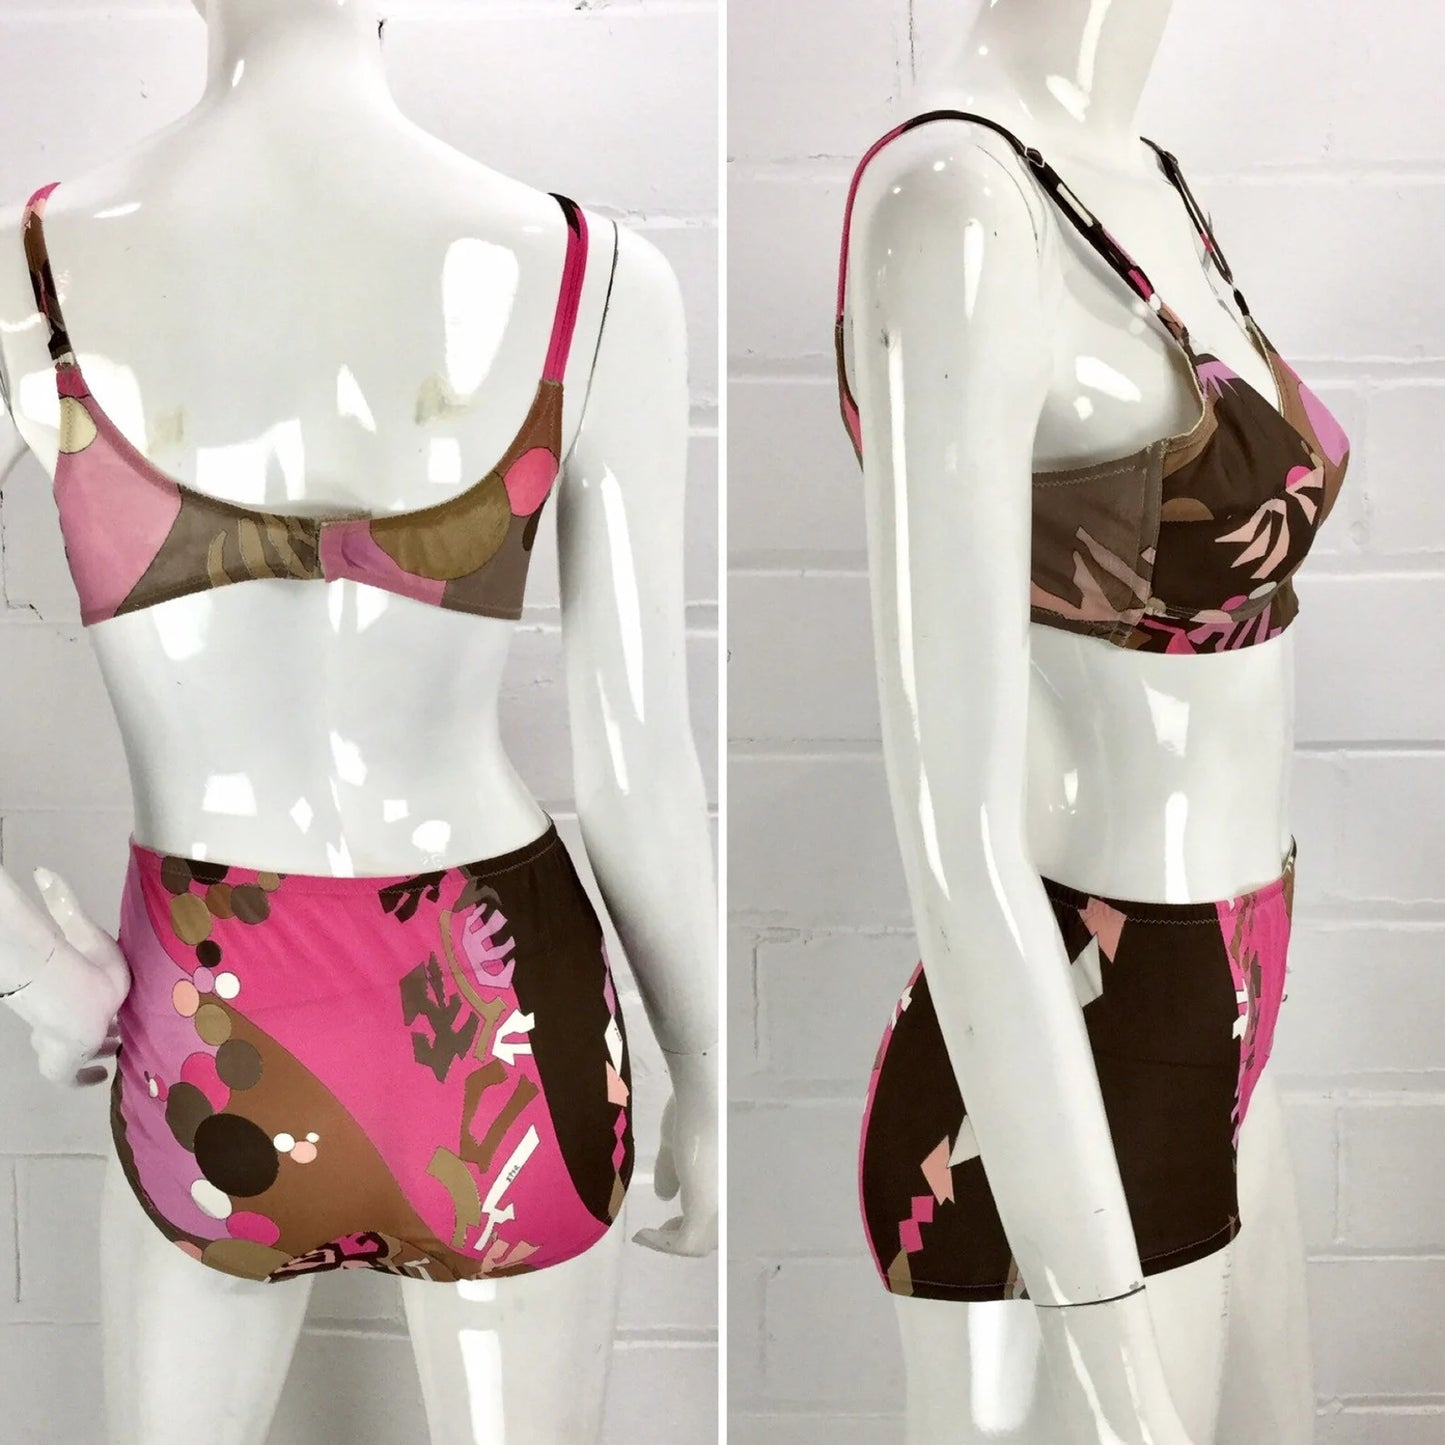 1960s/70s Emilio Pucci Lingerie Set, Vintage Pucci, Pink & Brown Abstract Print Bra Panties and Slip, Psychedelic Mod Pucci Underwear